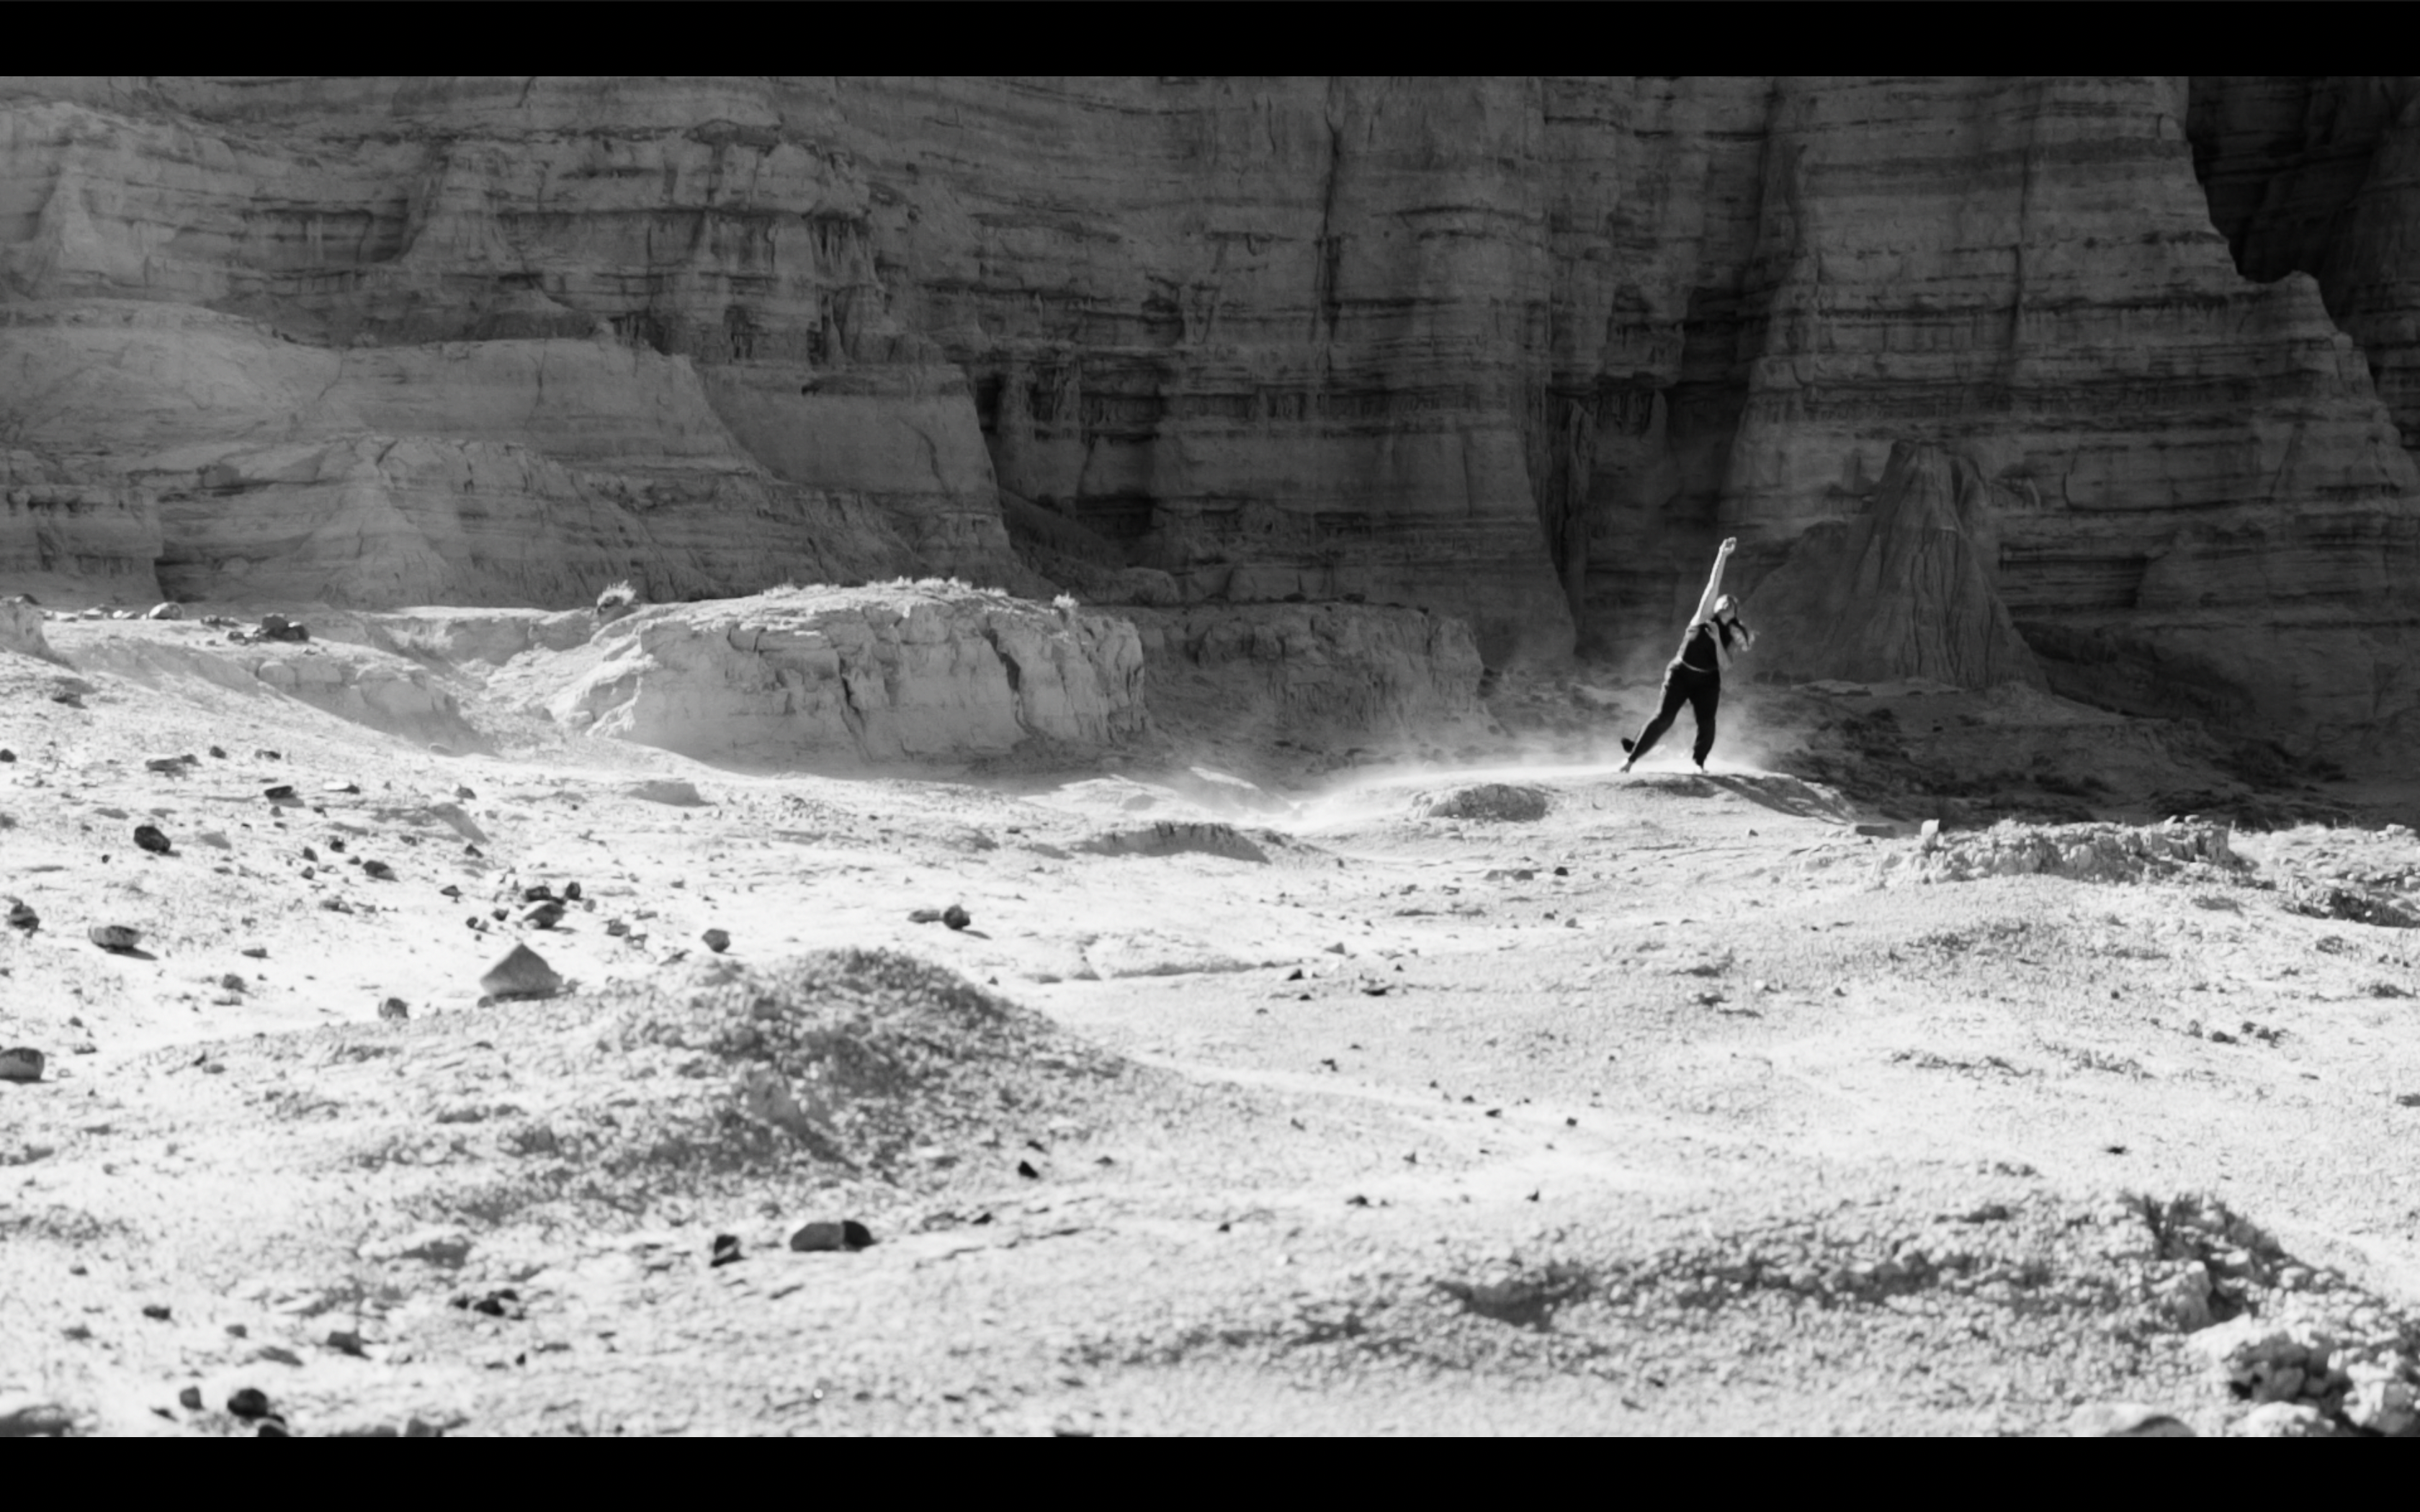 Nicole is standing among sandstone cliffs reaching her right arm upward and right leg to the side as the wind blows dust around her body. Black and white photo taken by Dmitri Von Klein.